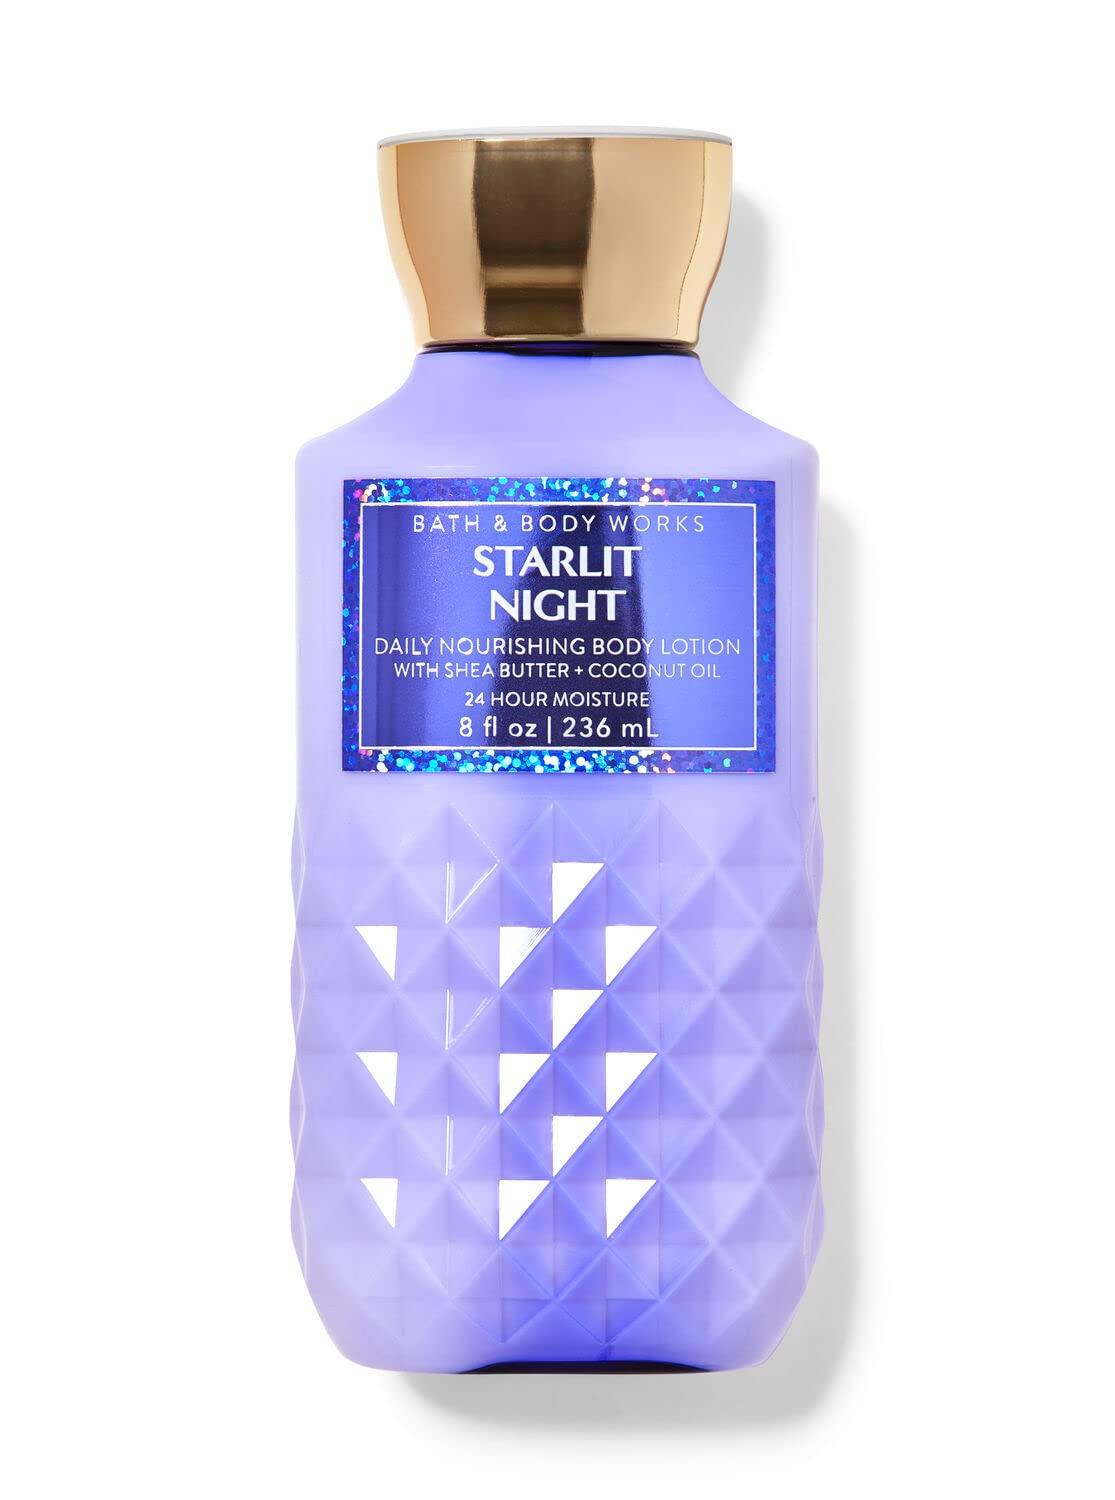 Bath and Body Works Starlit Night Super Smooth Body Lotion Sets